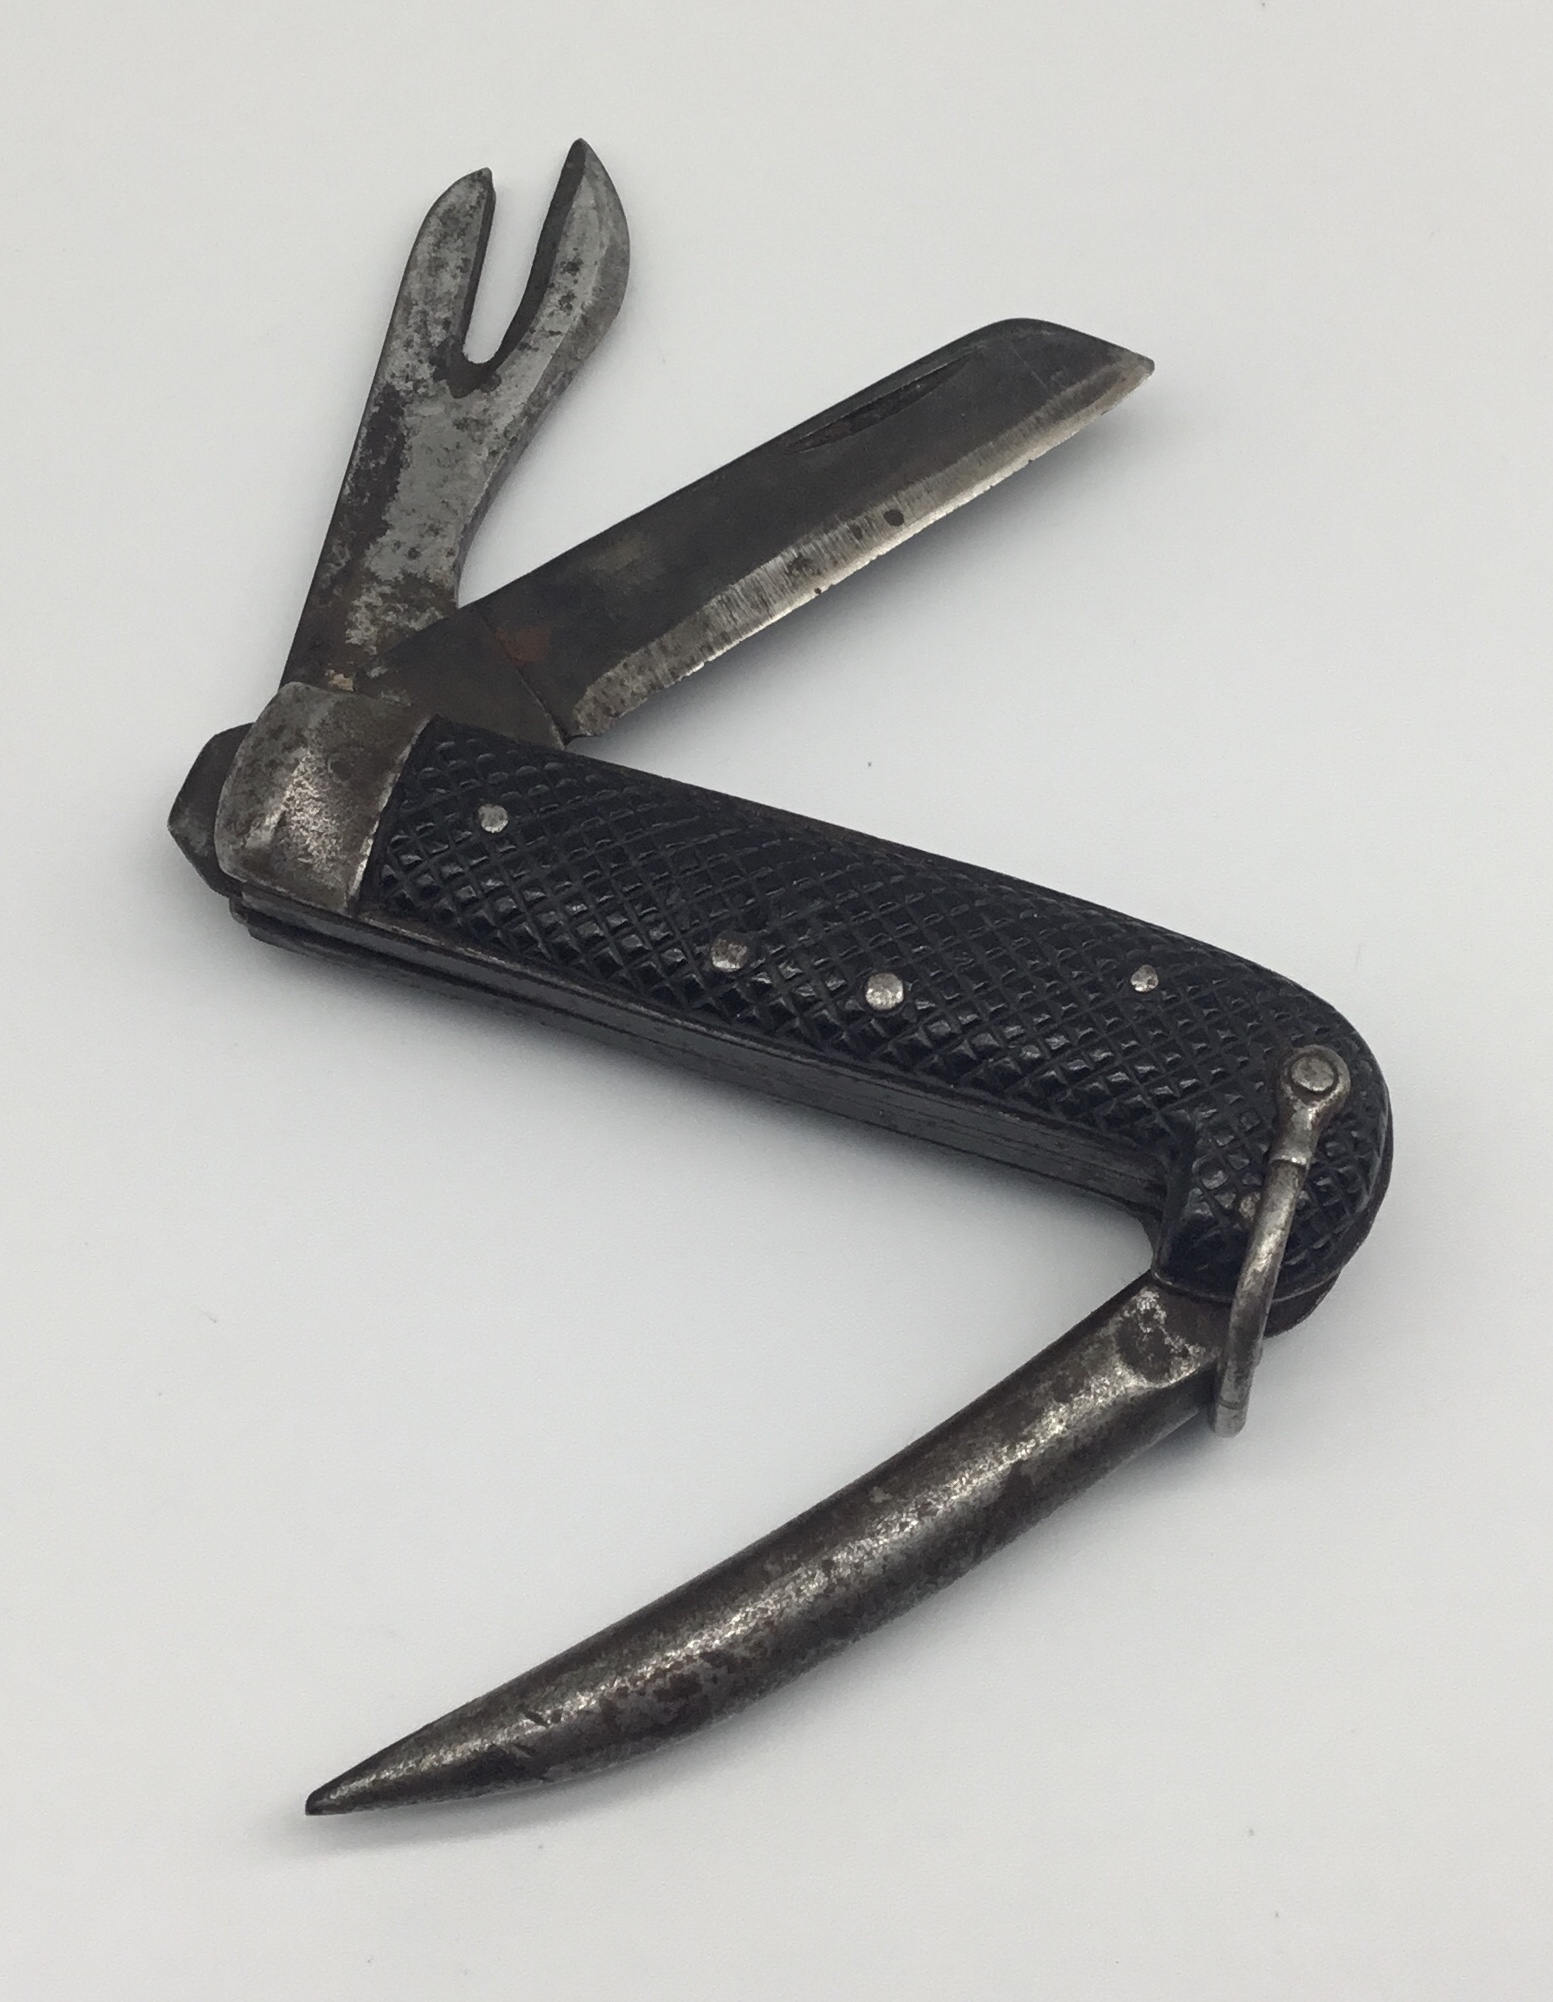 A WW2 era Royal Navy issued jack knife. Dated 1941, with a broad arrow mark, and the maker mark - Image 2 of 8